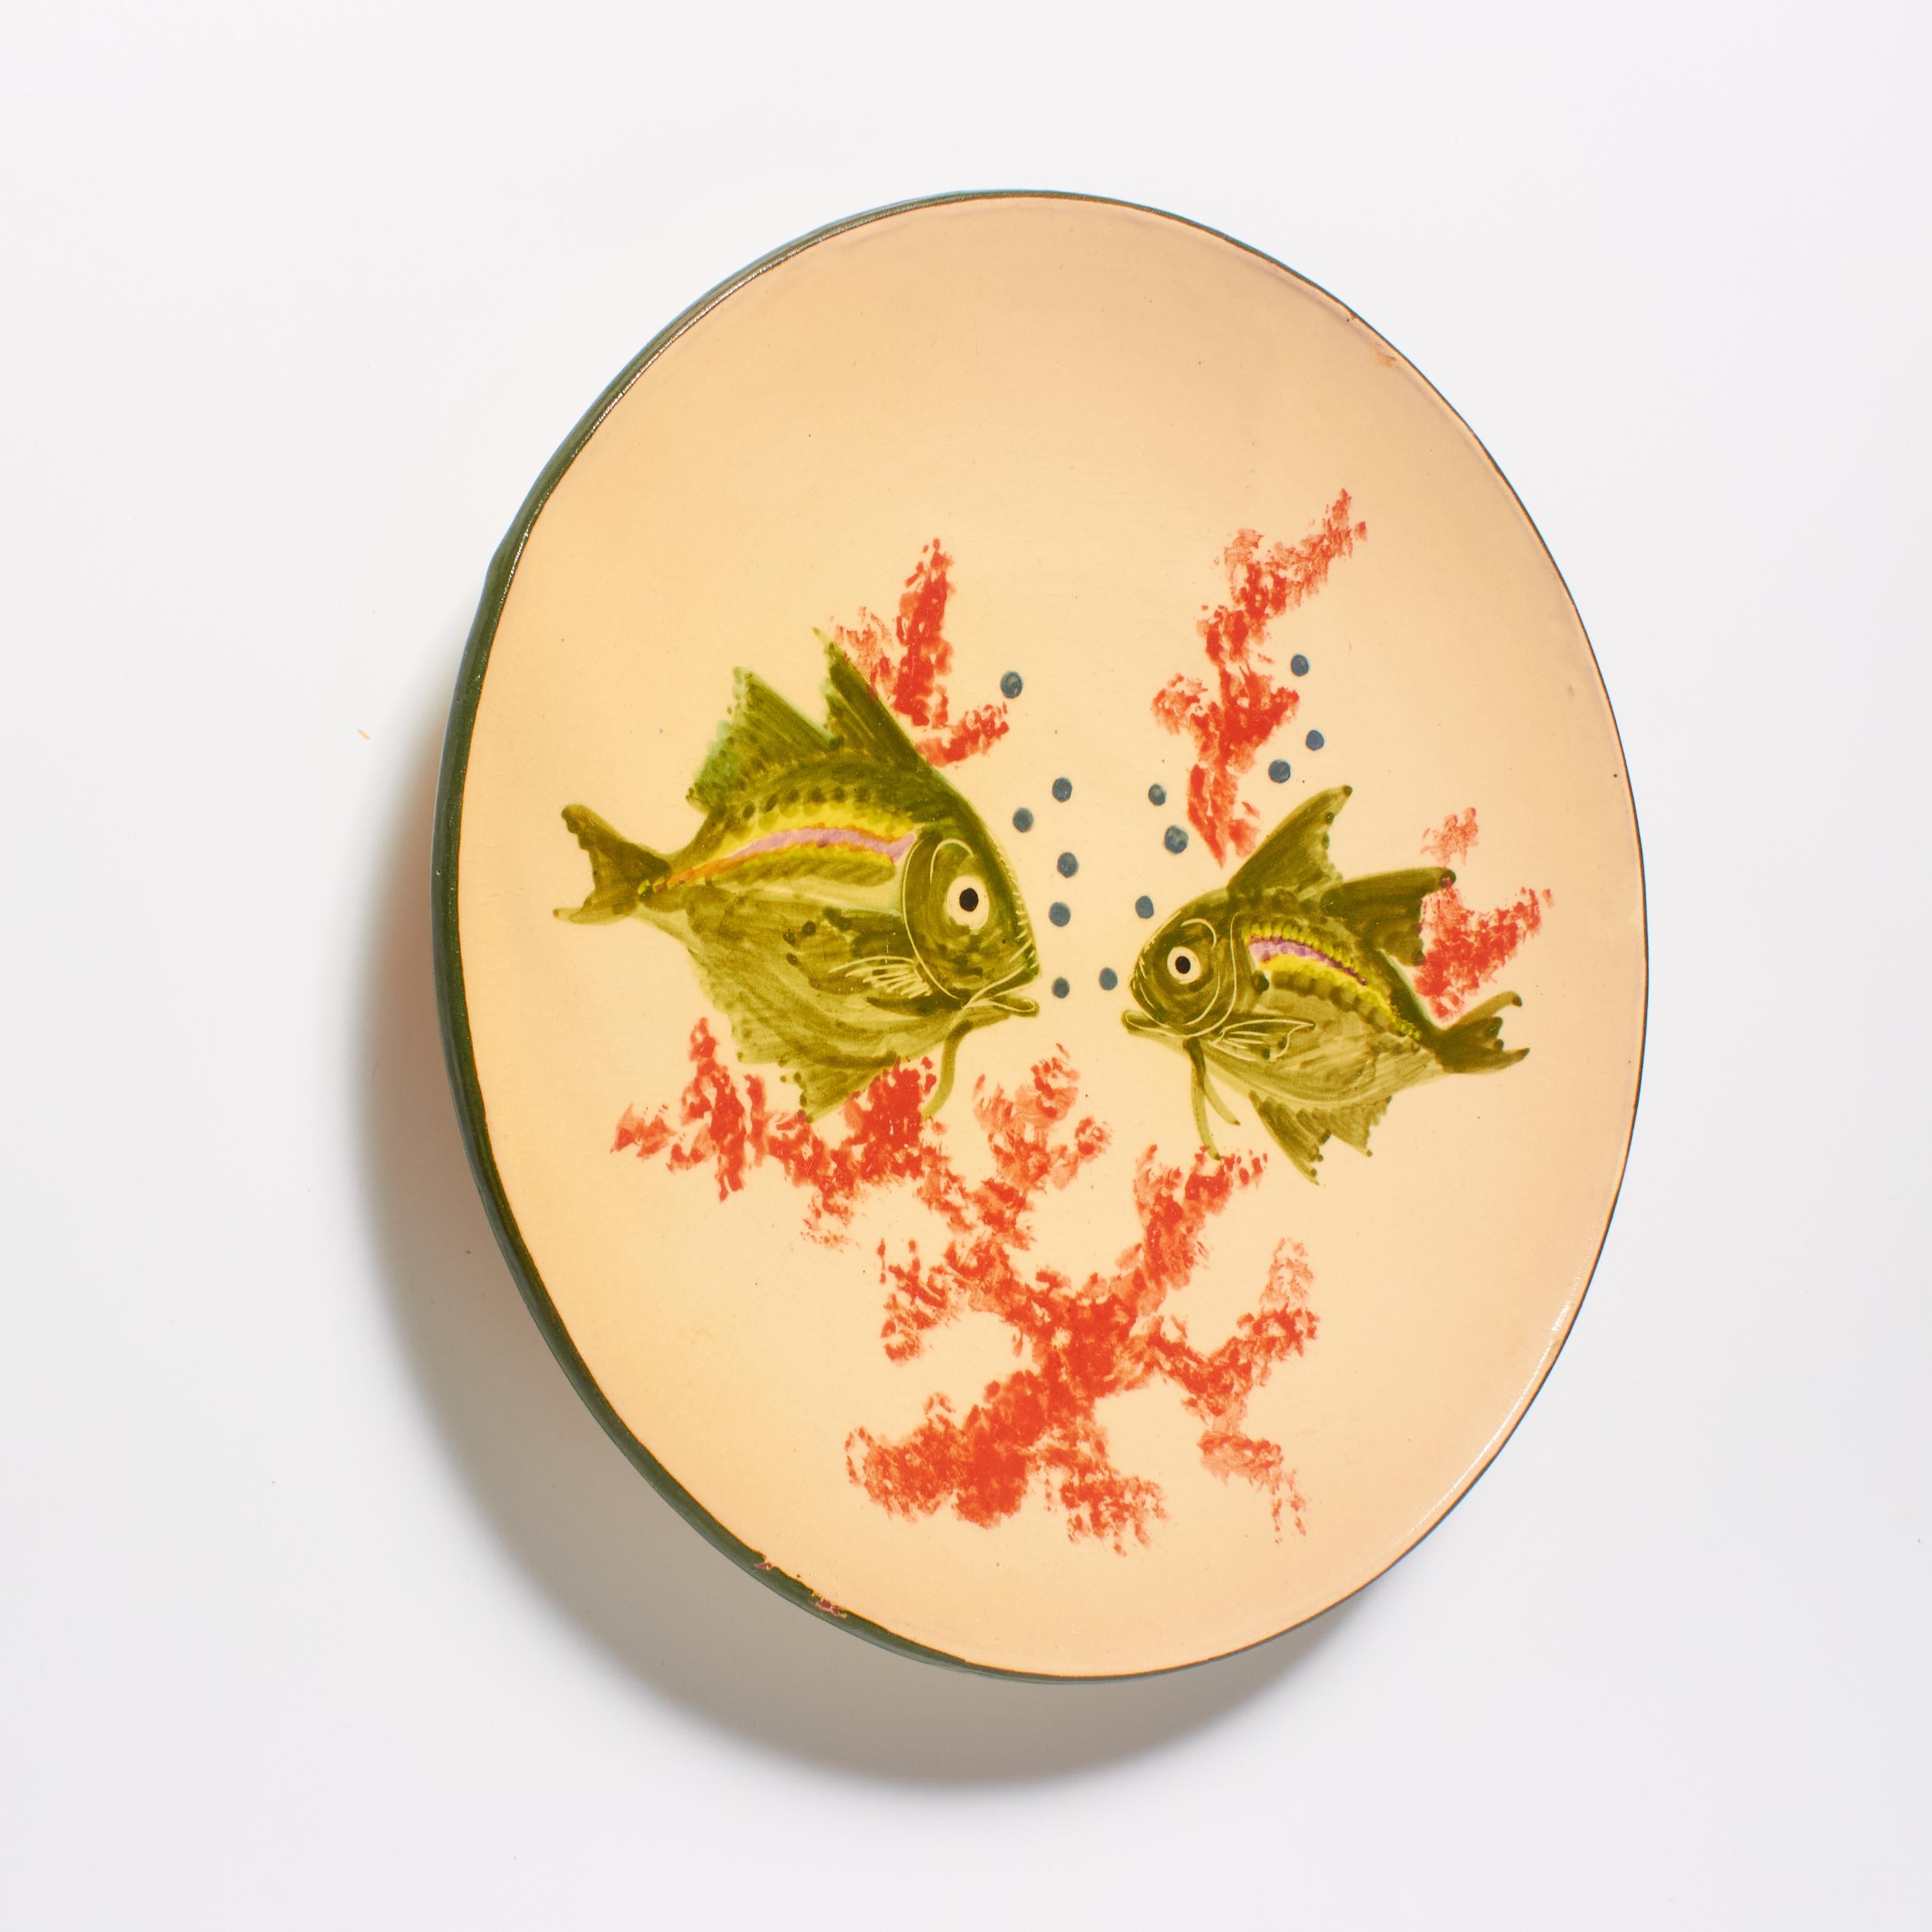 Spanish Ceramic Traditional Hand Painted Plate by Catalan Artist Diaz Costa, circa 1960